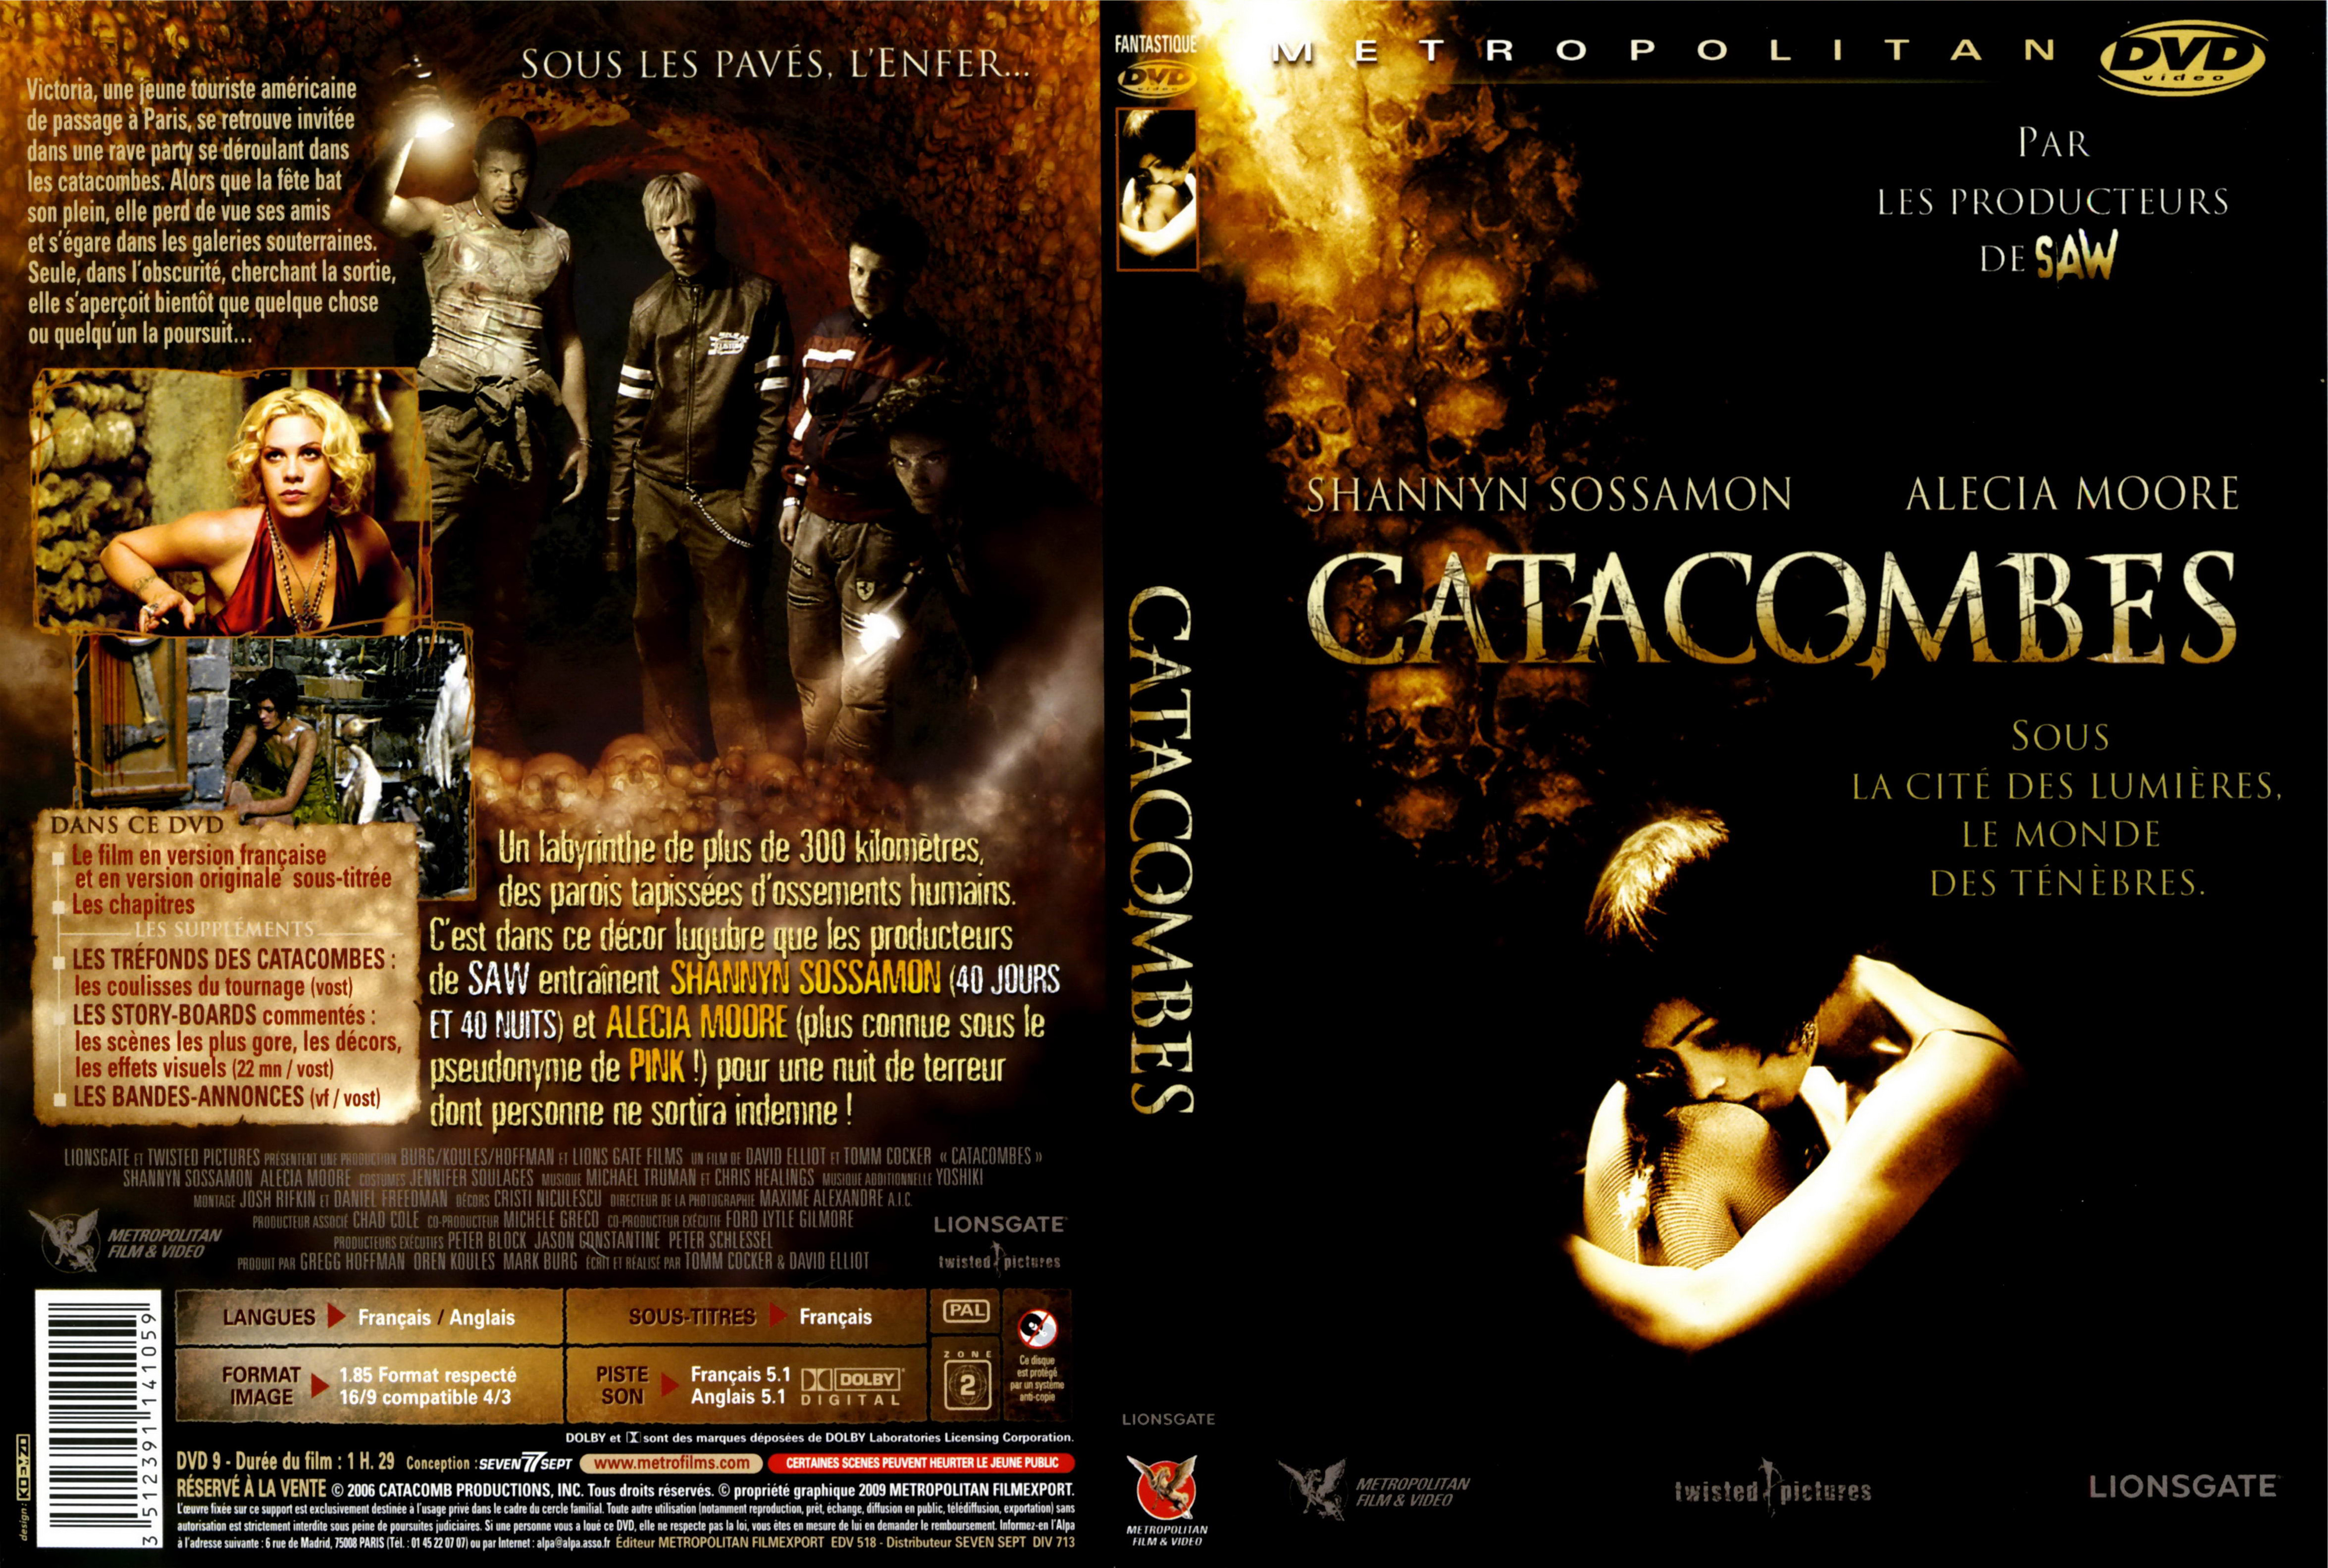 Jaquette DVD Catacombes